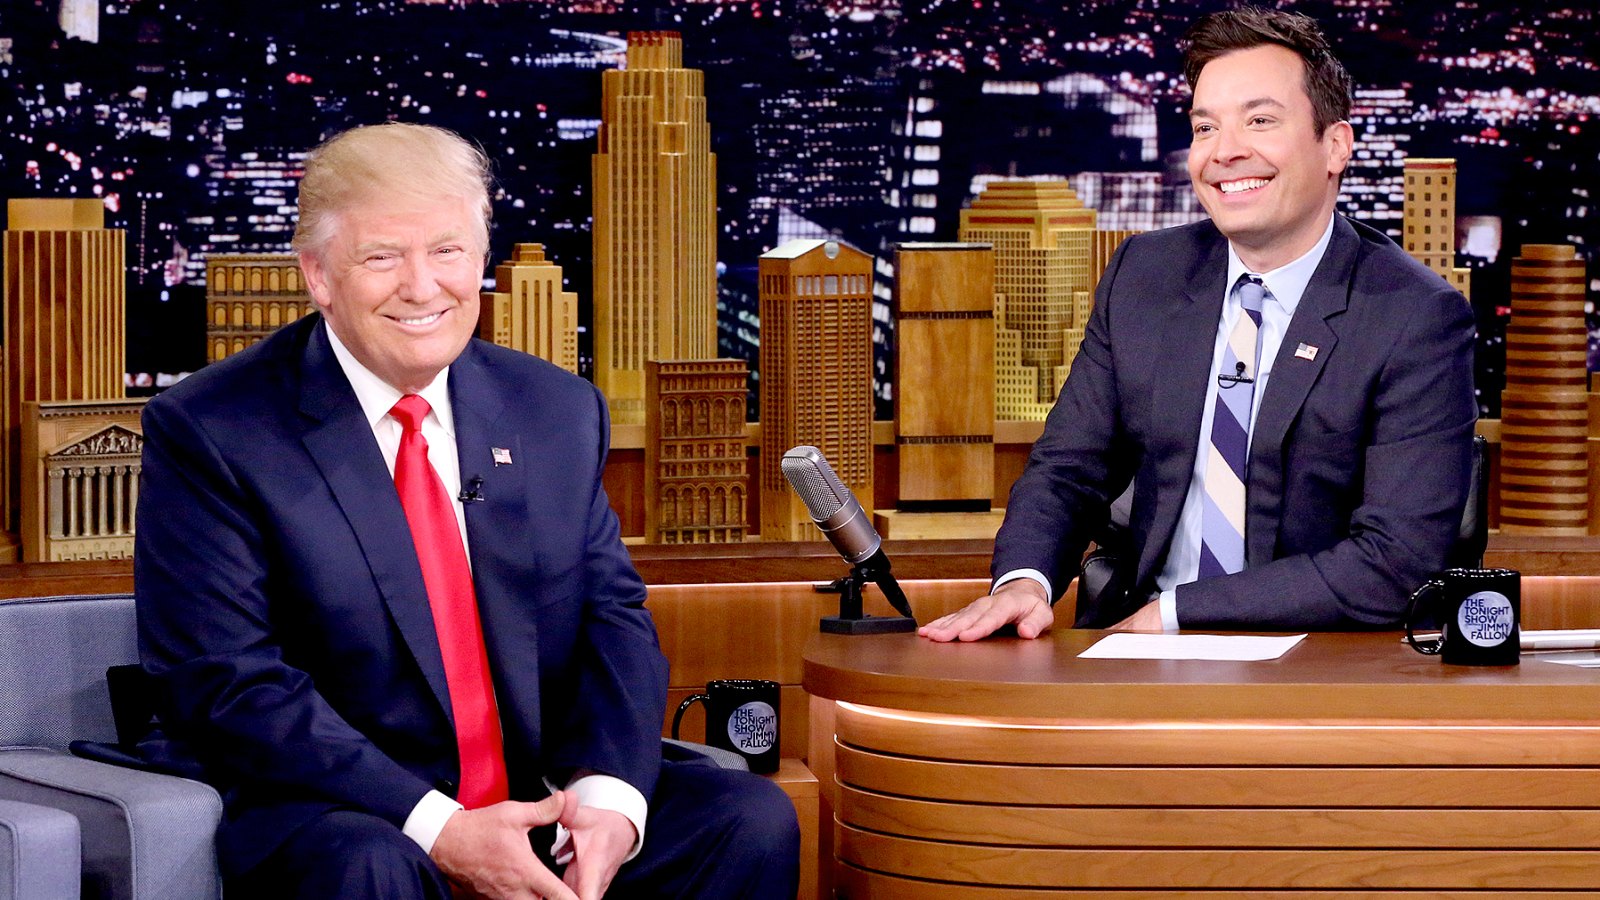 Donald Trump during an interview with host Jimmy Fallon on September 15, 2016